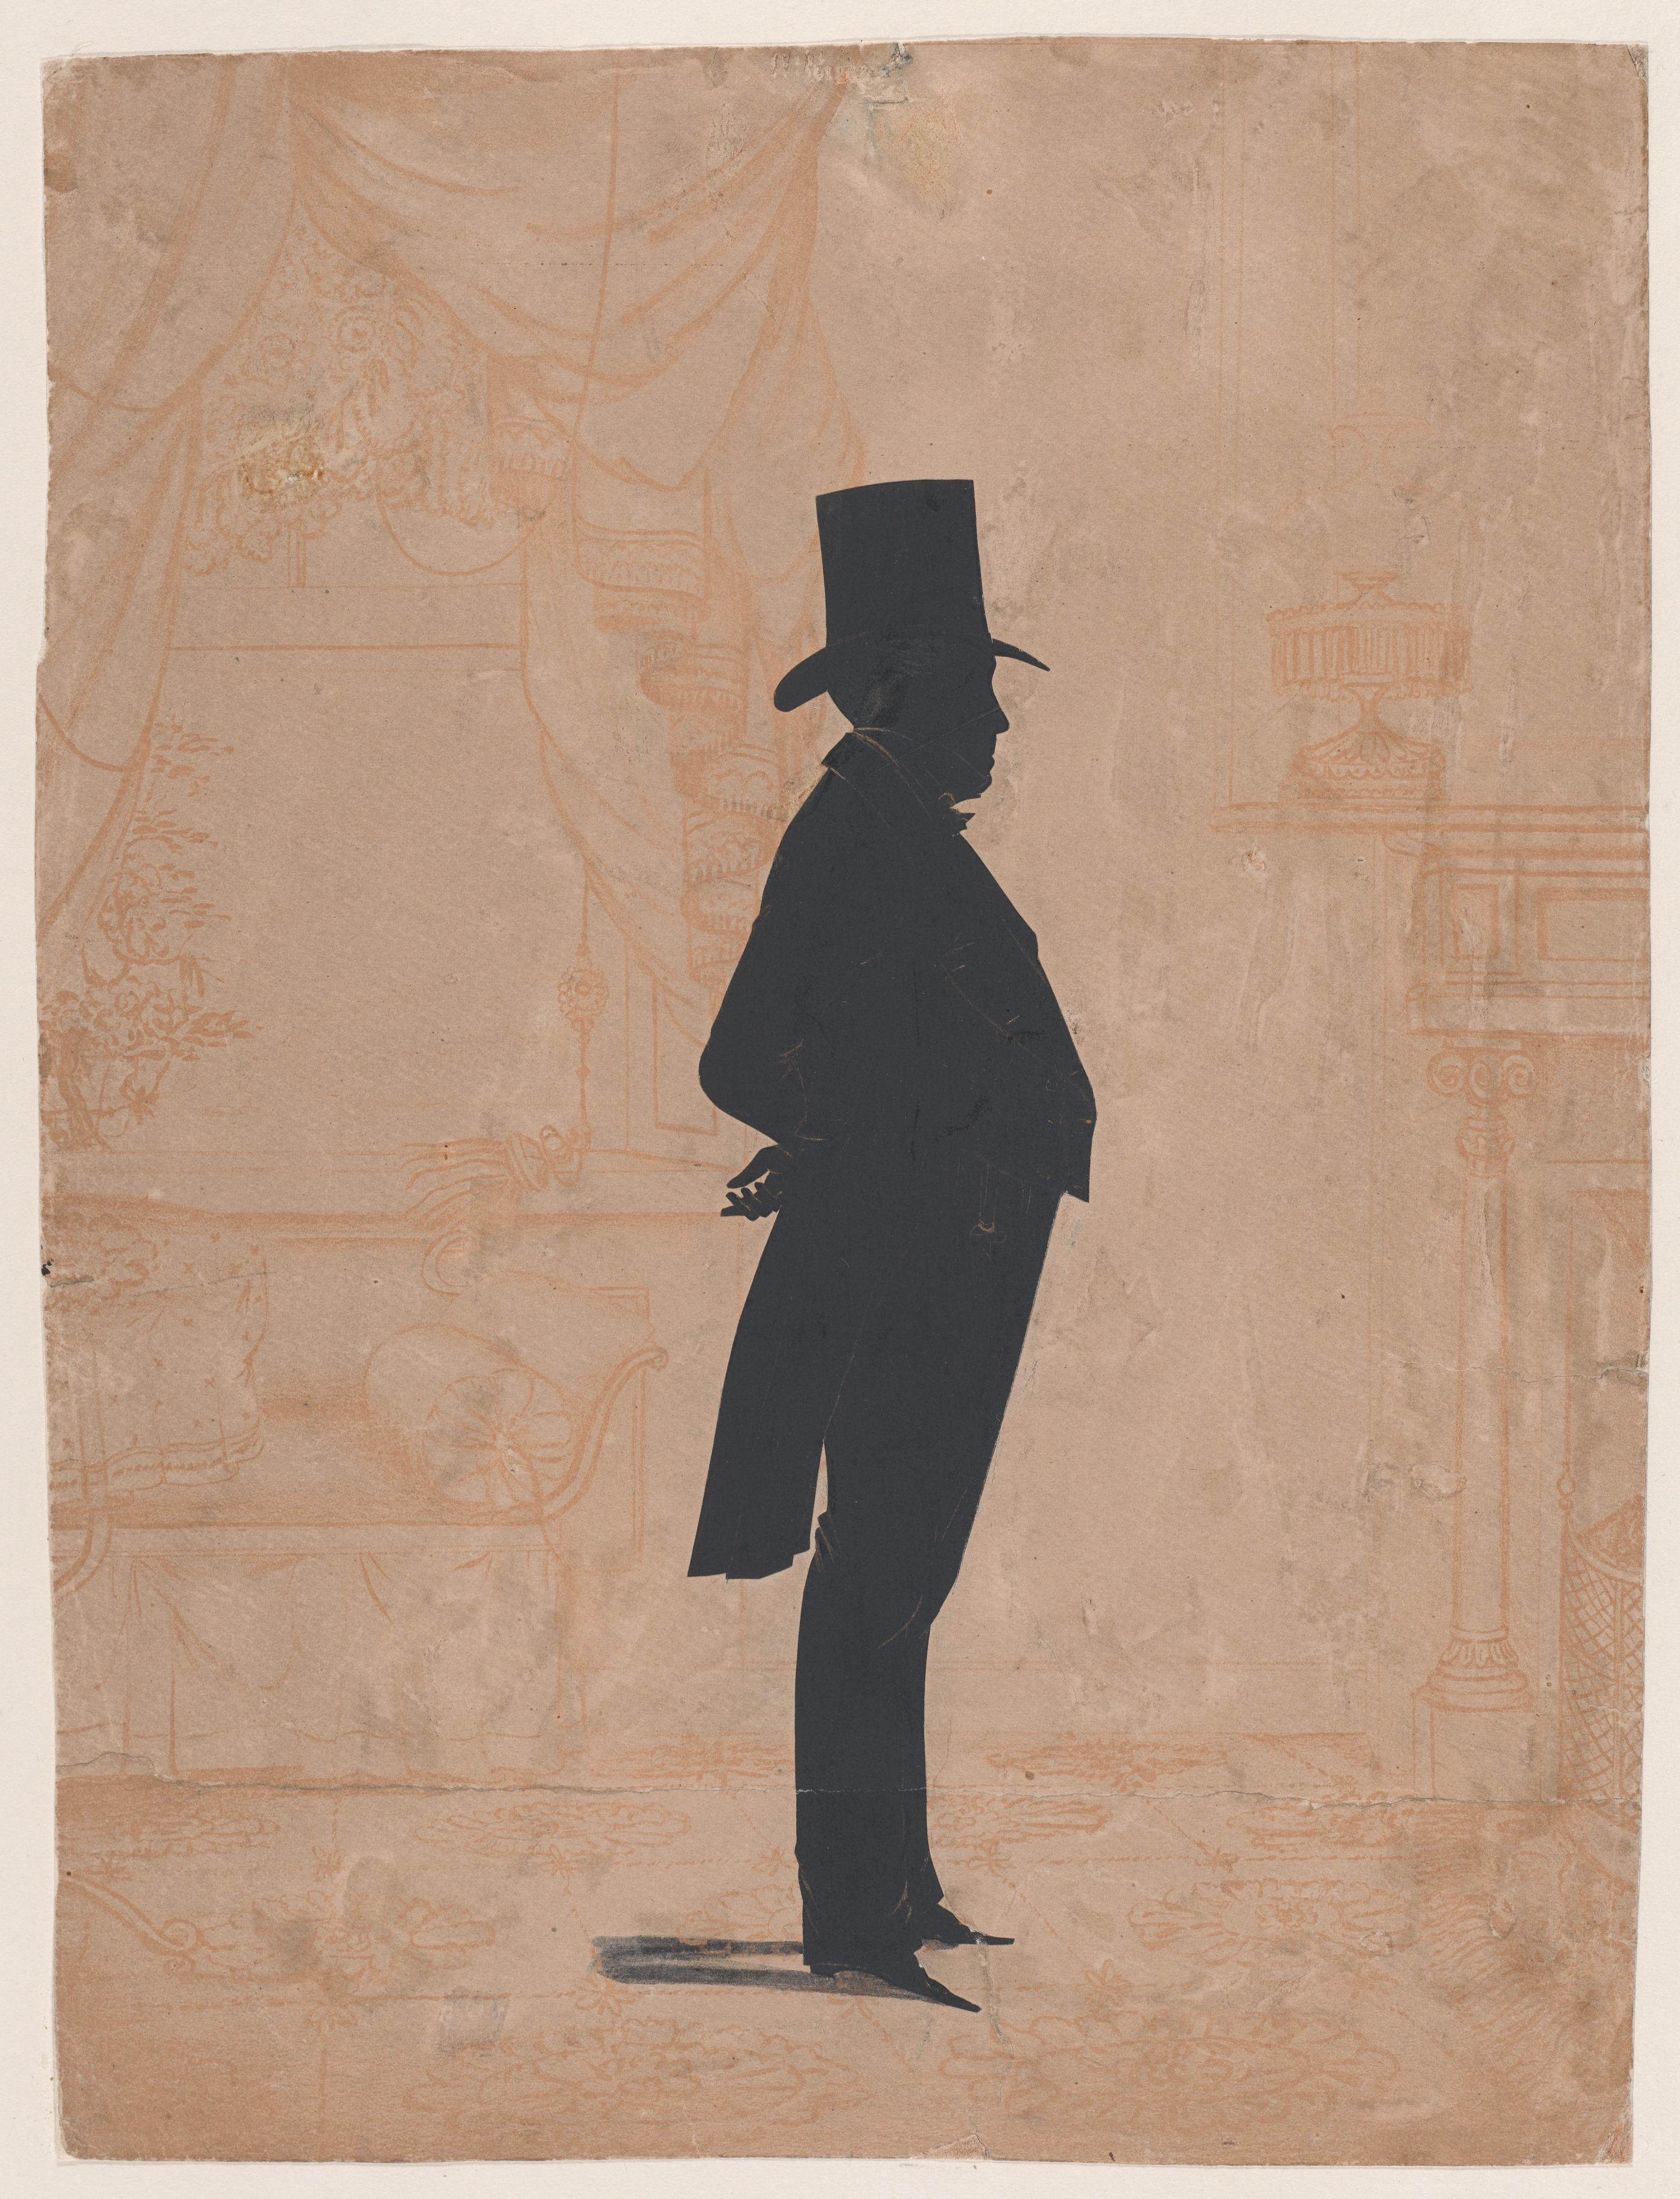 Possibly by William Henry Brown, Silhouette of an unknown man in a top hat  and tails